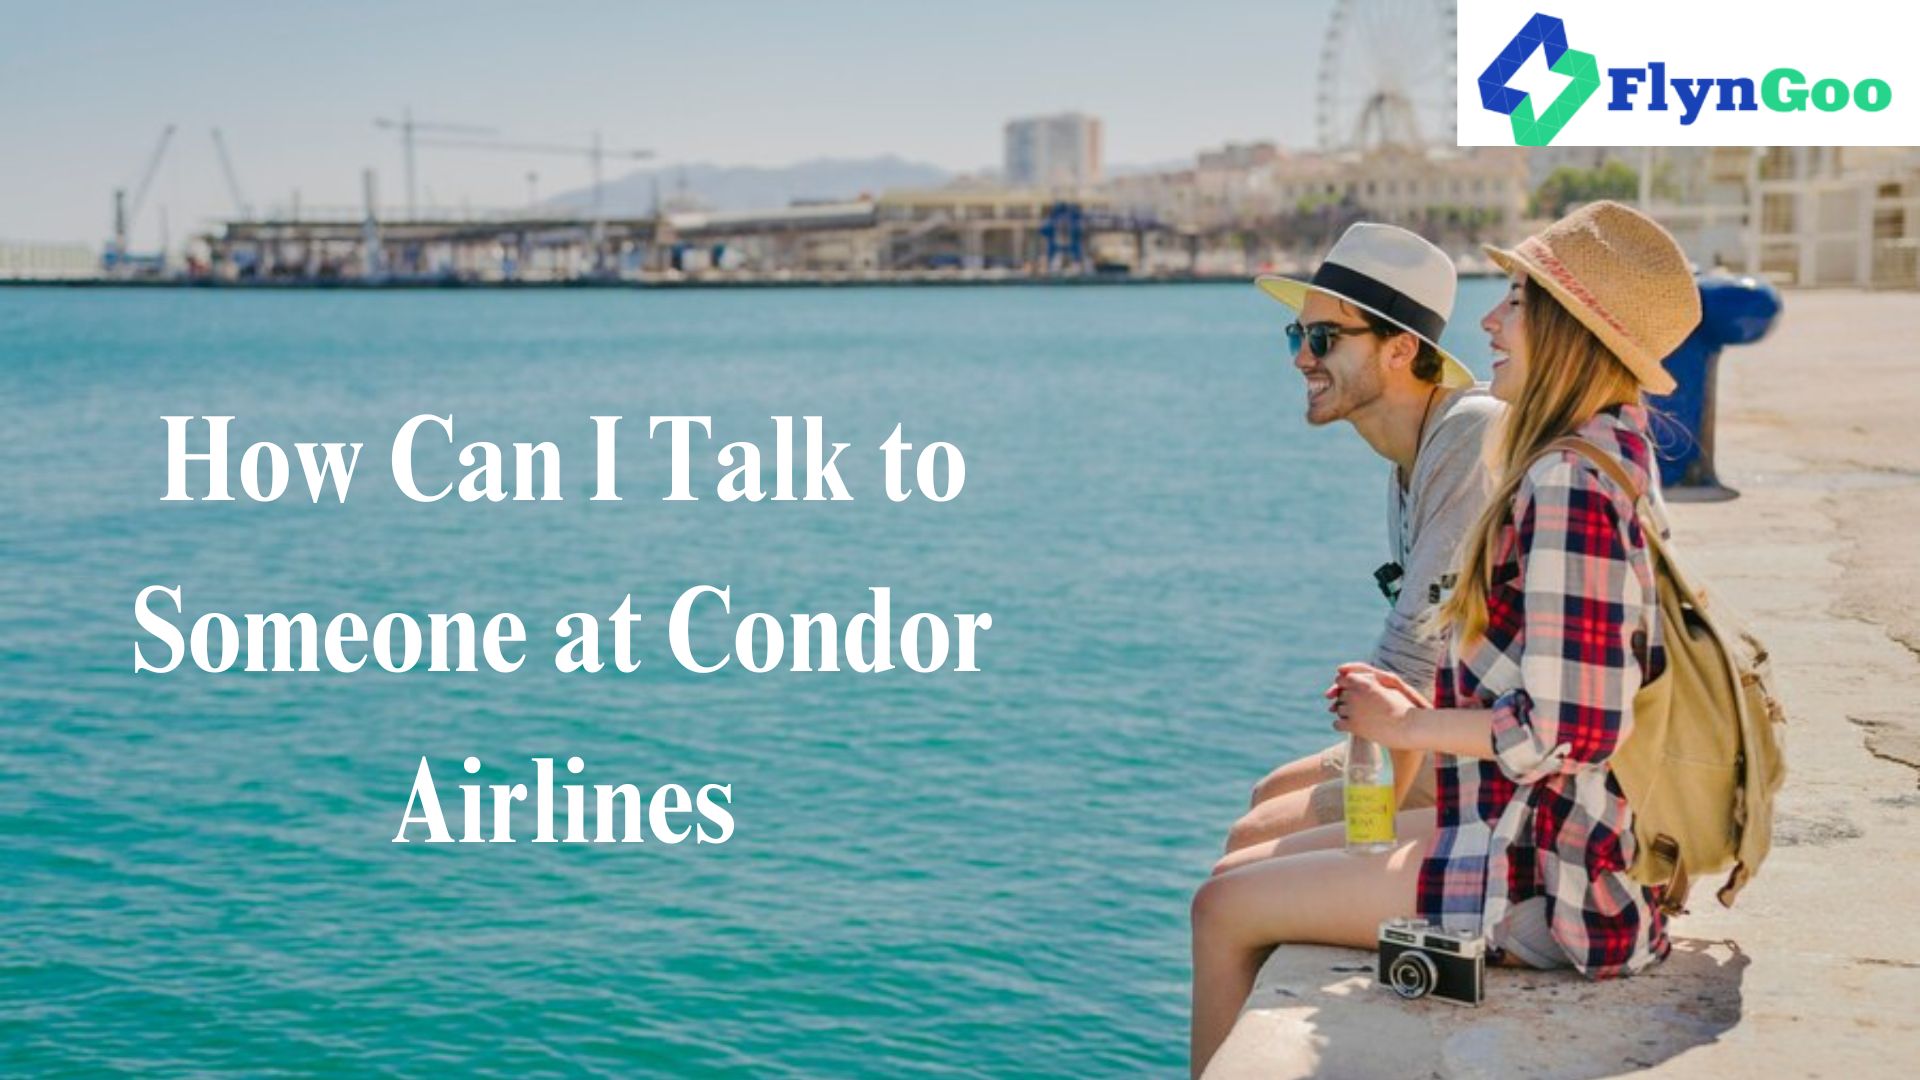 How Can I Talk to Someone at Condor Airlines?